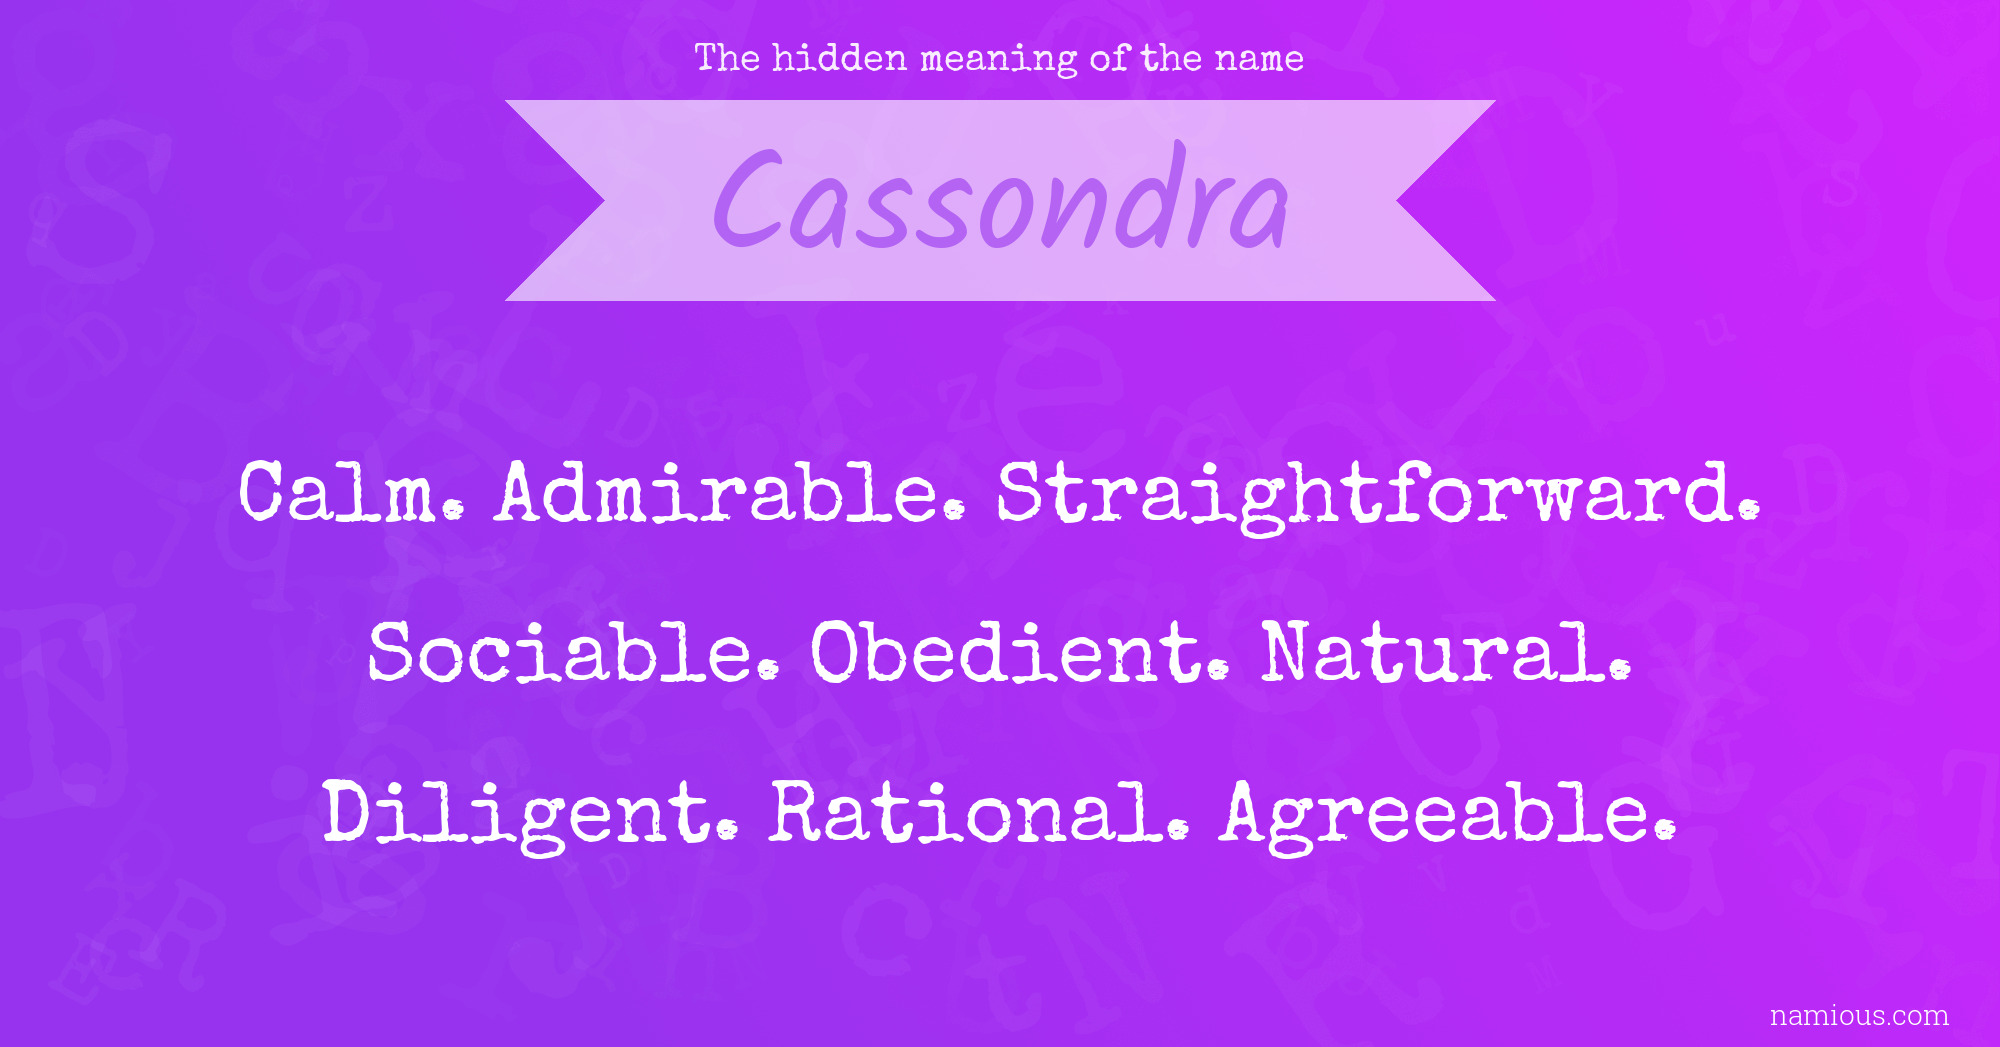 The hidden meaning of the name Cassondra